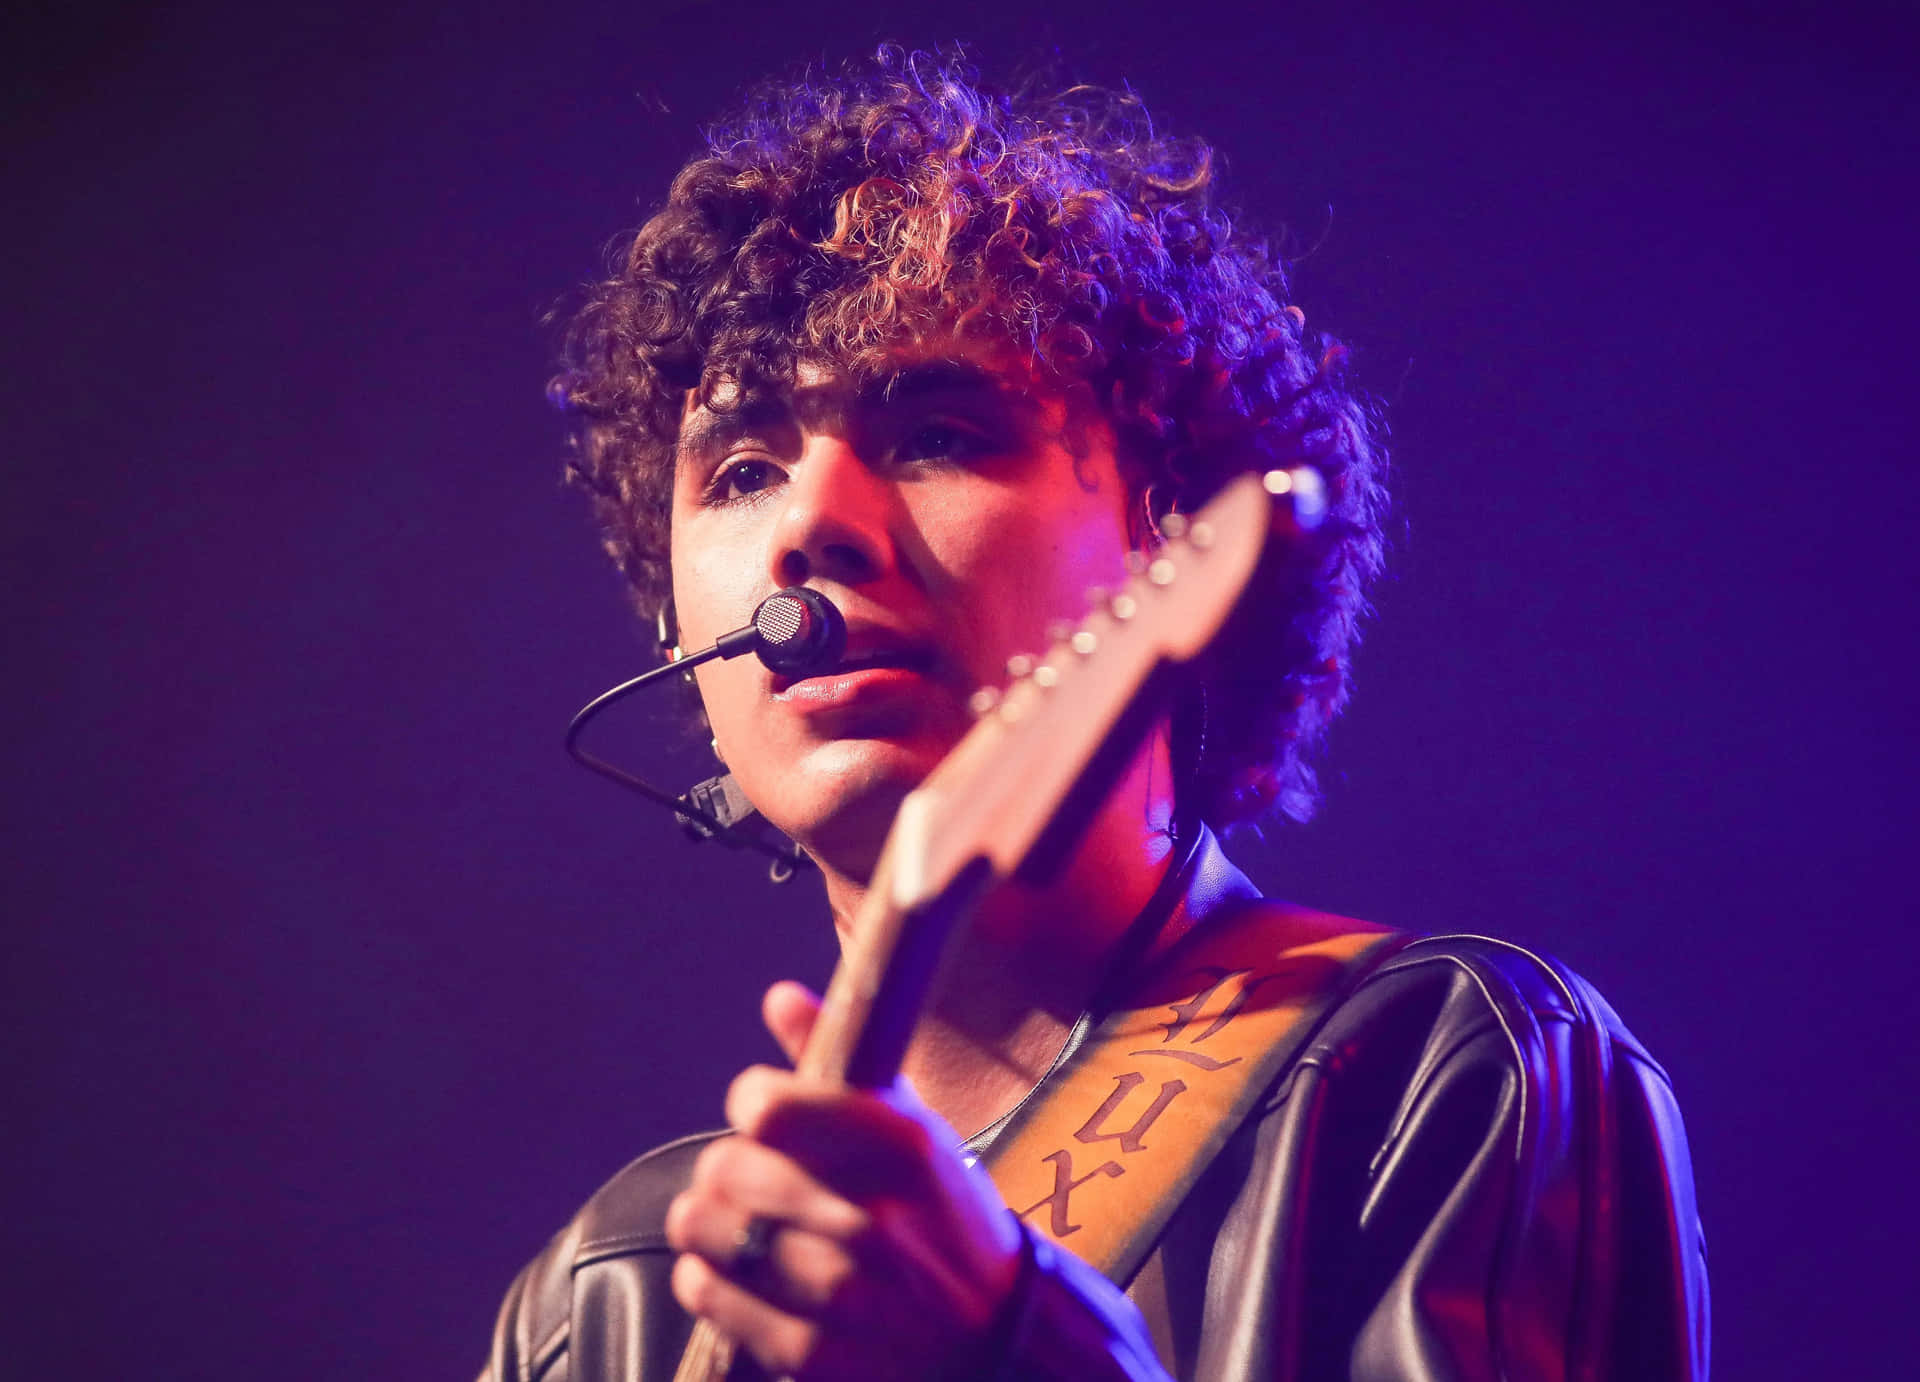 Curly Haired Musician Performing Live Wallpaper